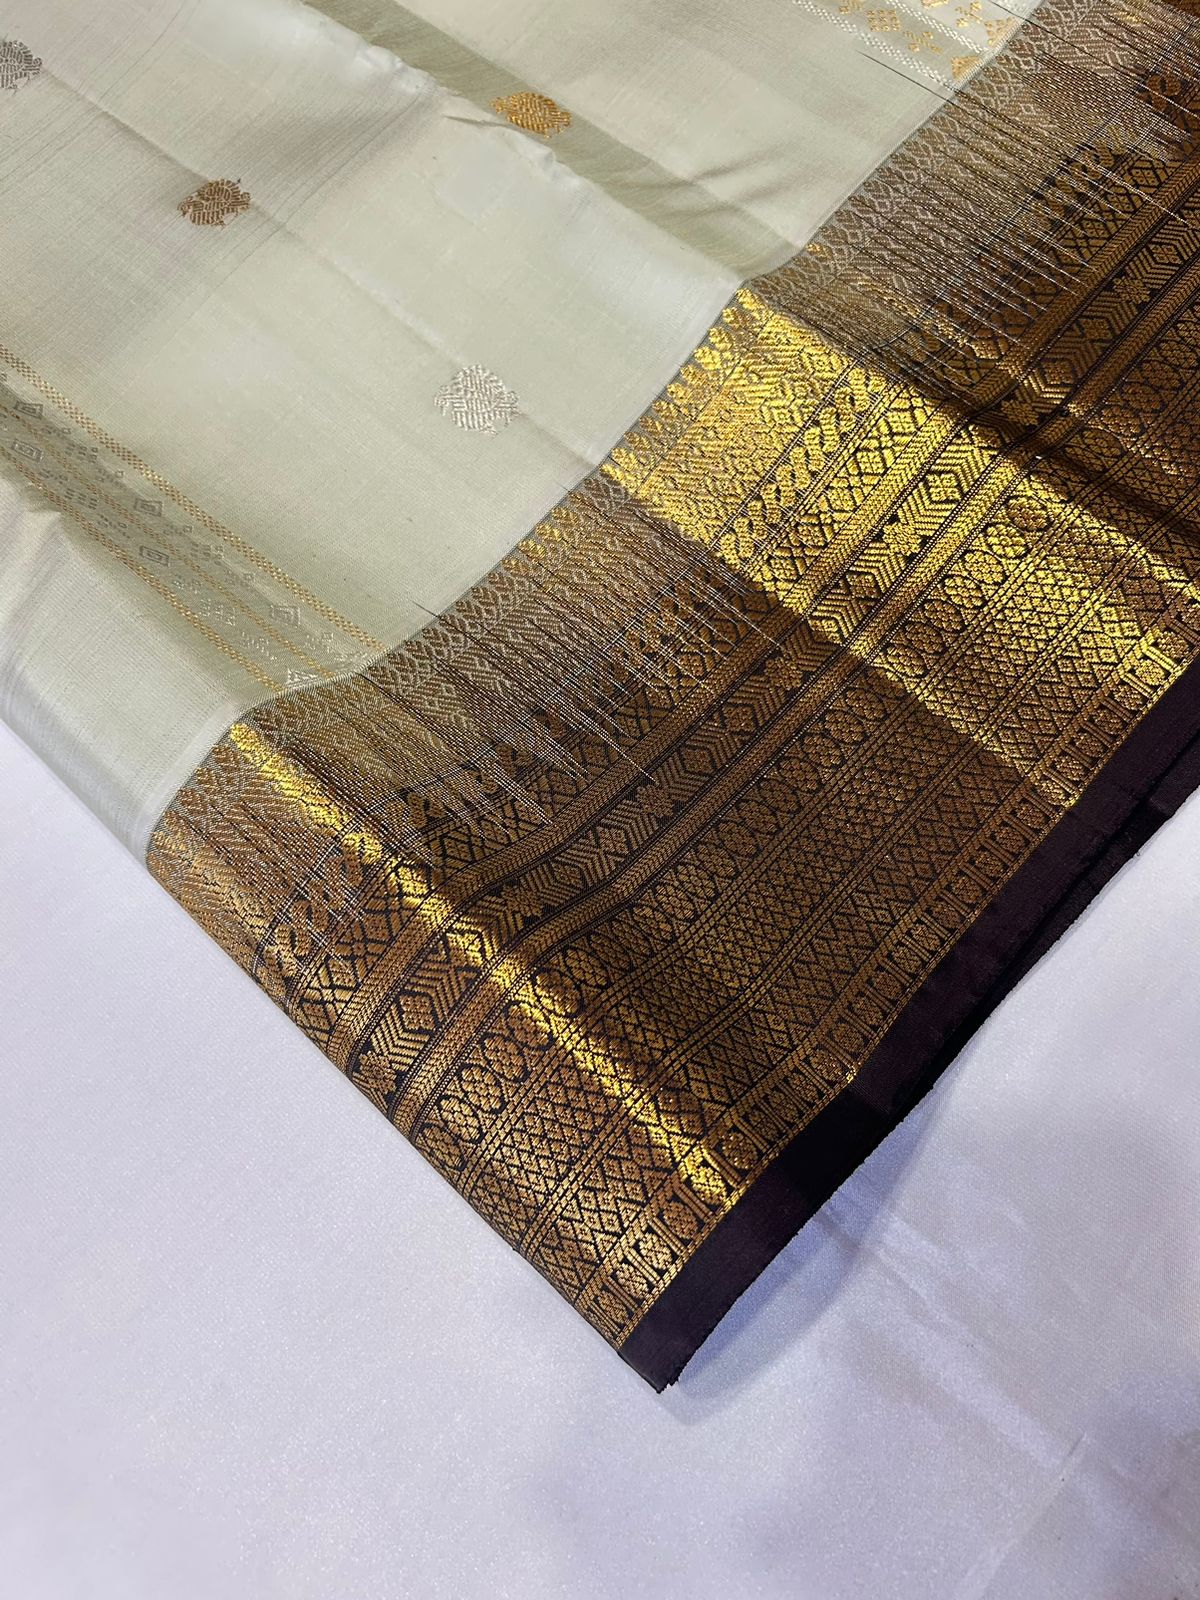 Authentic Pochampally Sarees Straight from the Hands of Artisans